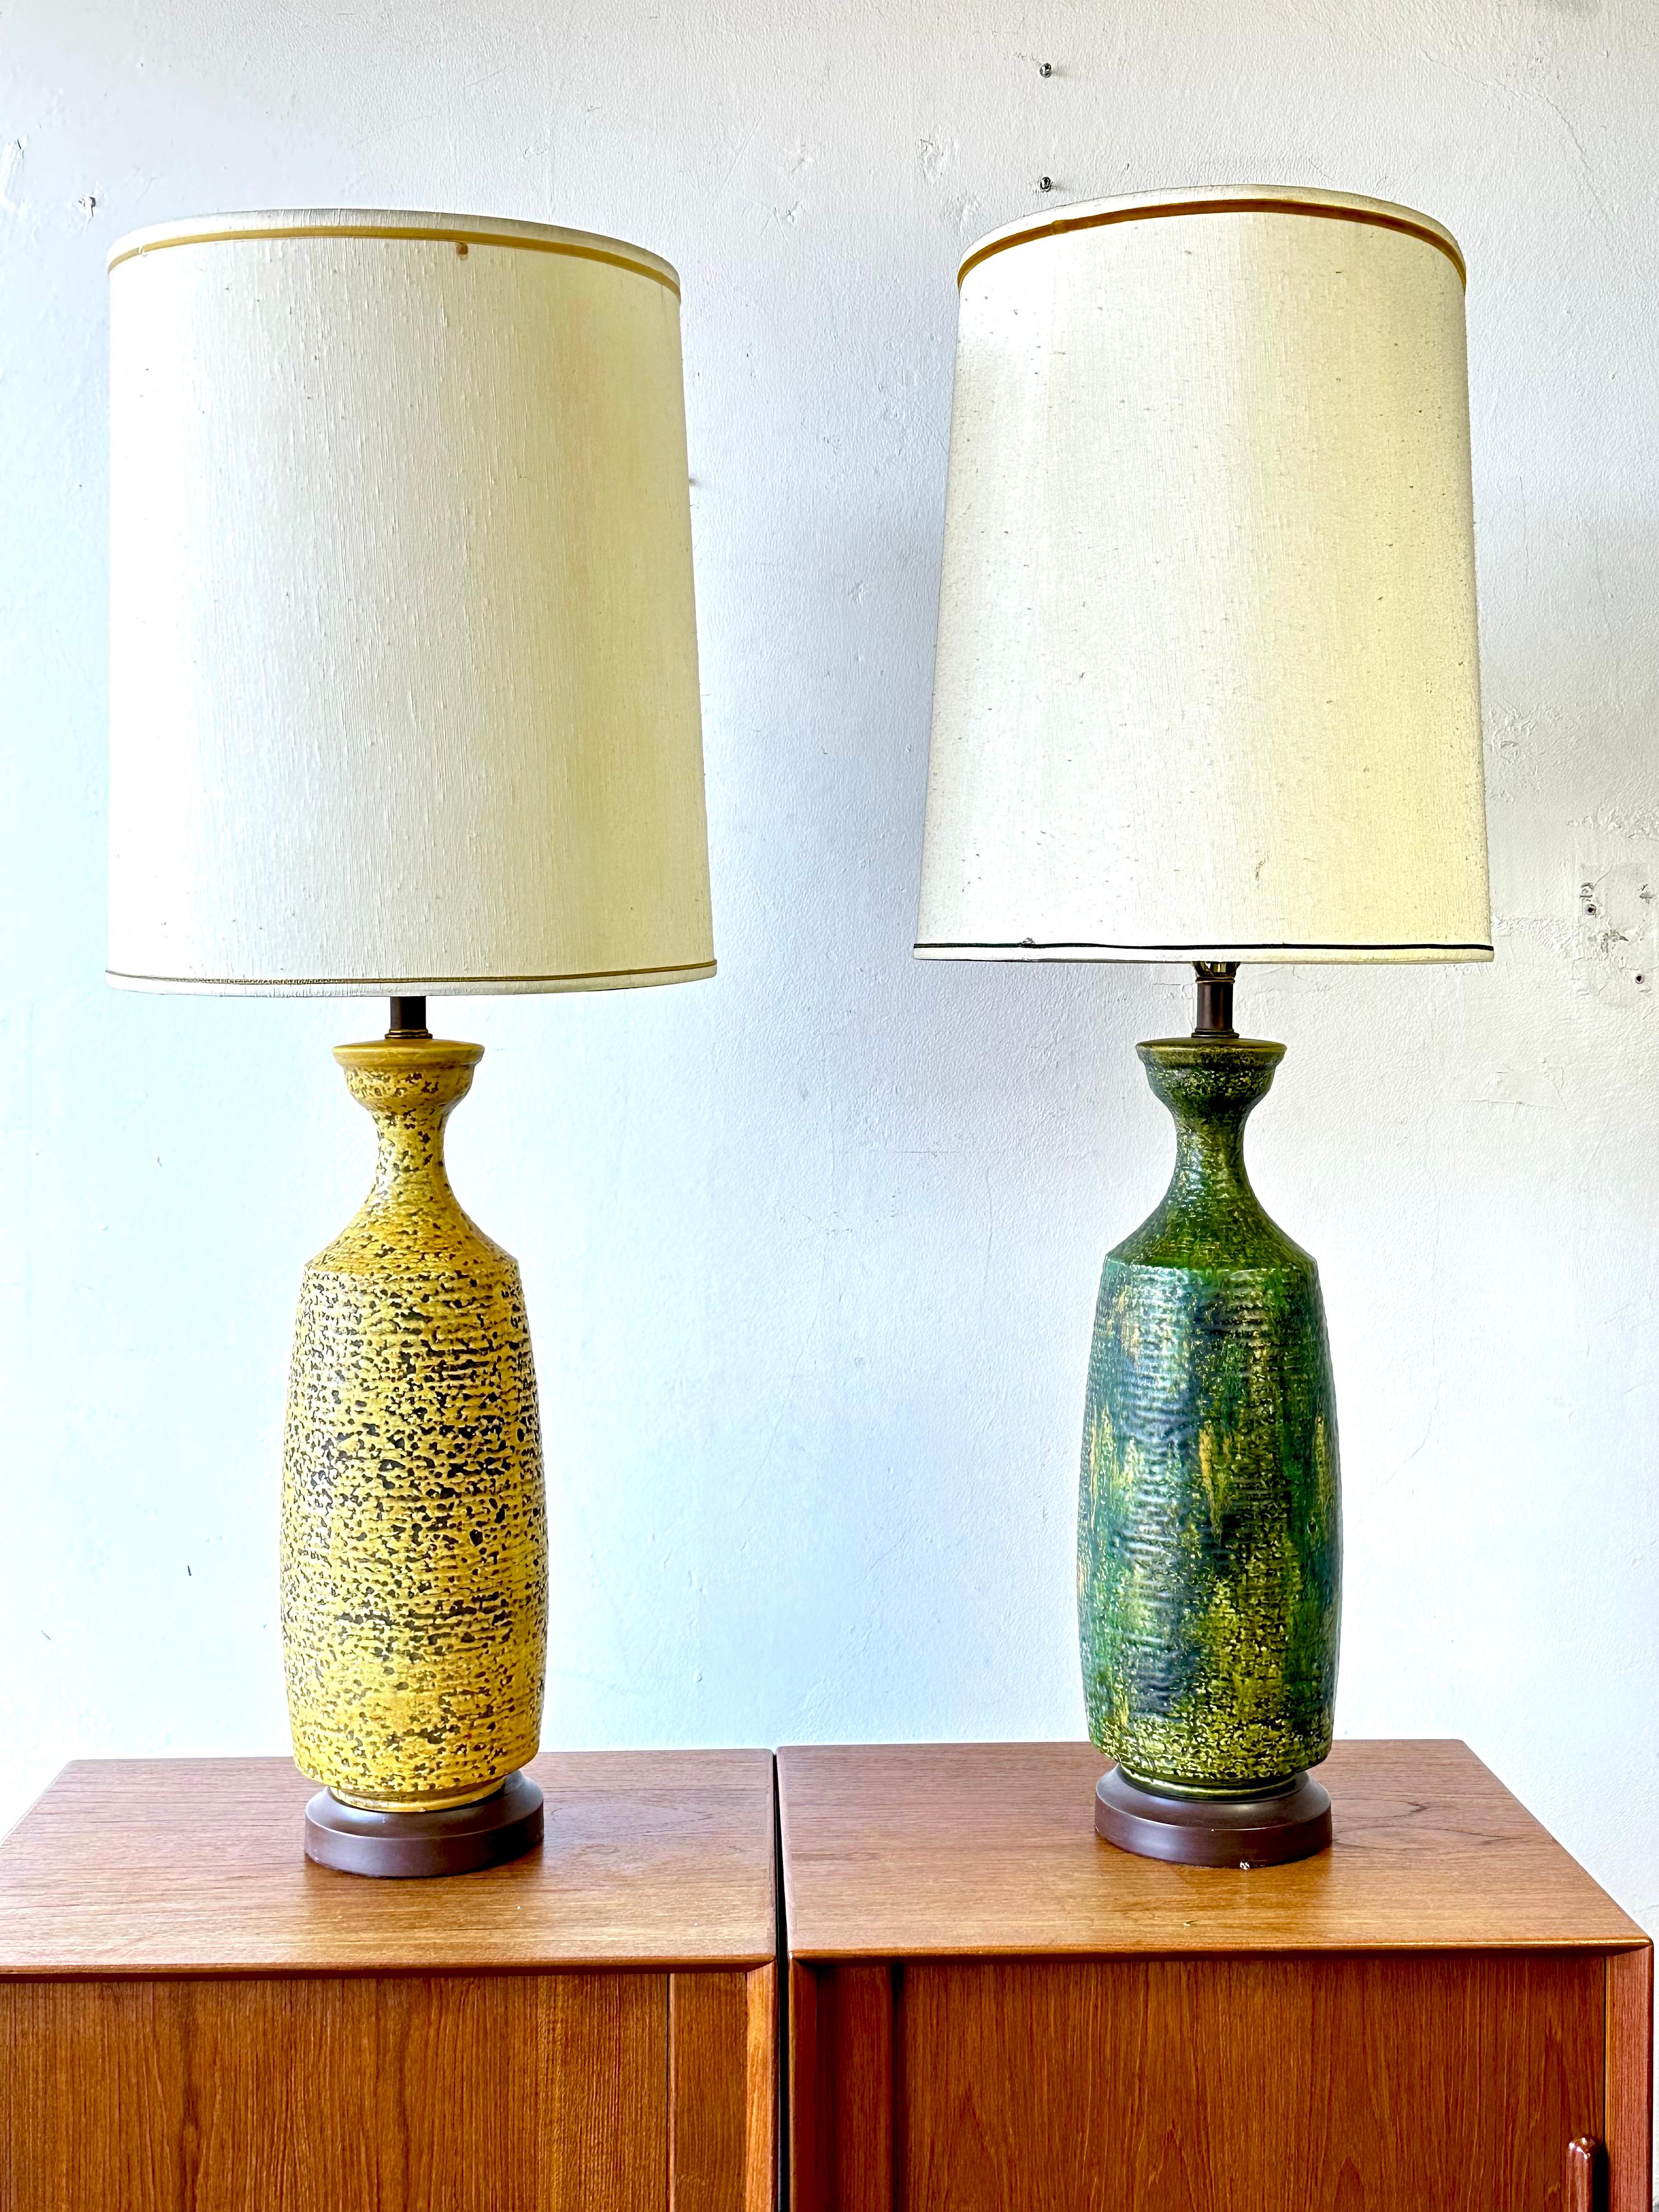 Pair of Mid-Century Modern Lemon & Lime Ceramic Table Lamps Yellow Green In Good Condition For Sale In Las Vegas, NV